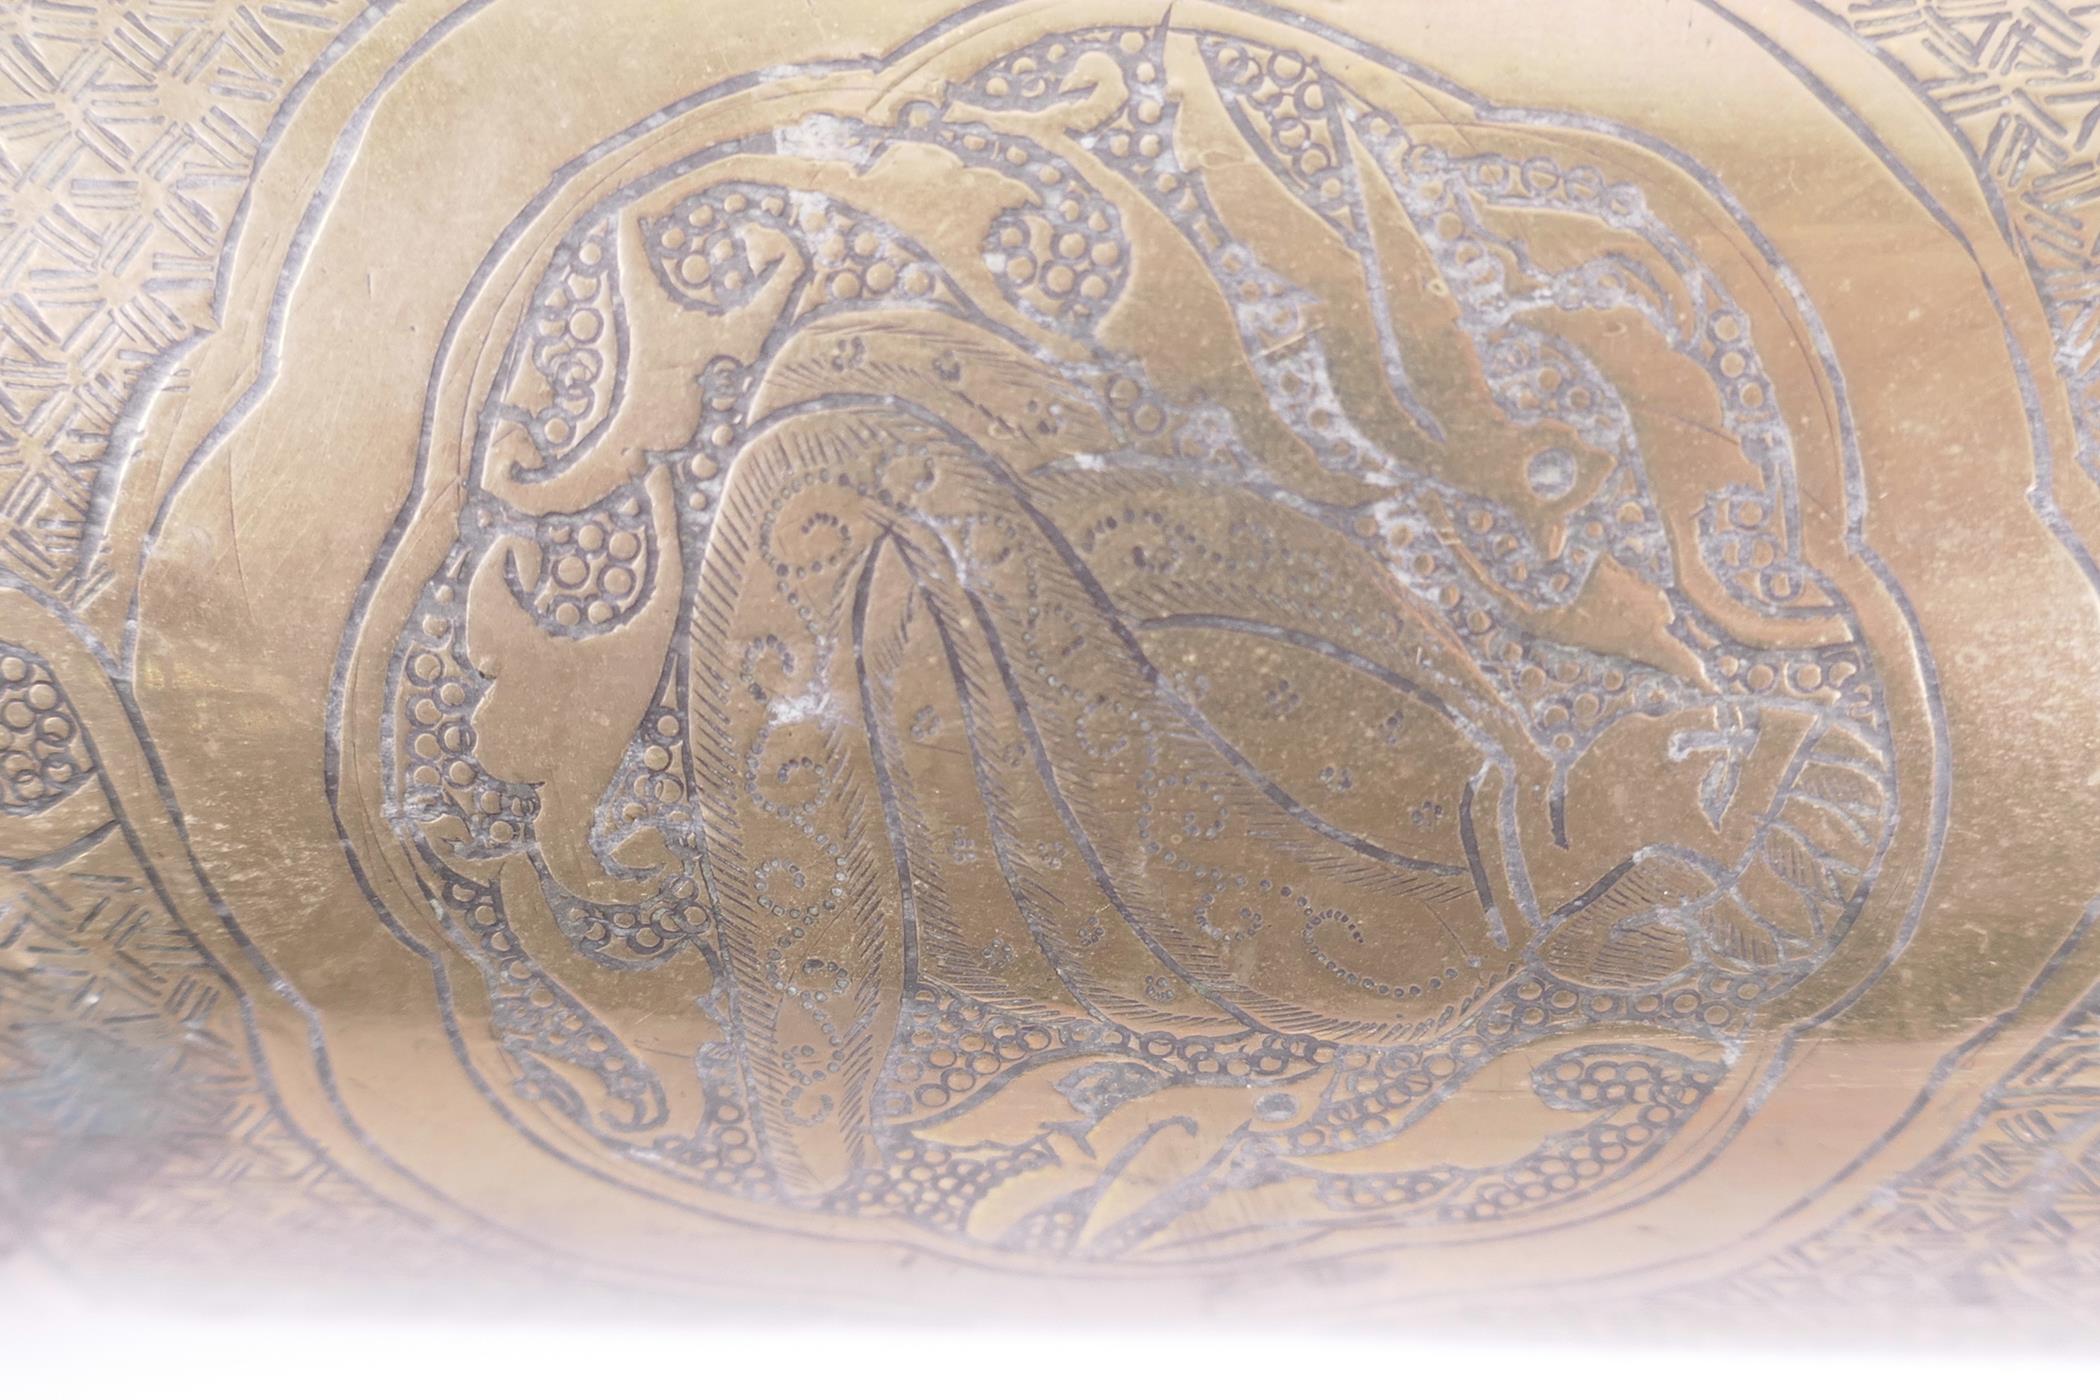 Trench Art, a brass shell case engraved with panels of figures, Persian patterns and script, - Image 3 of 3